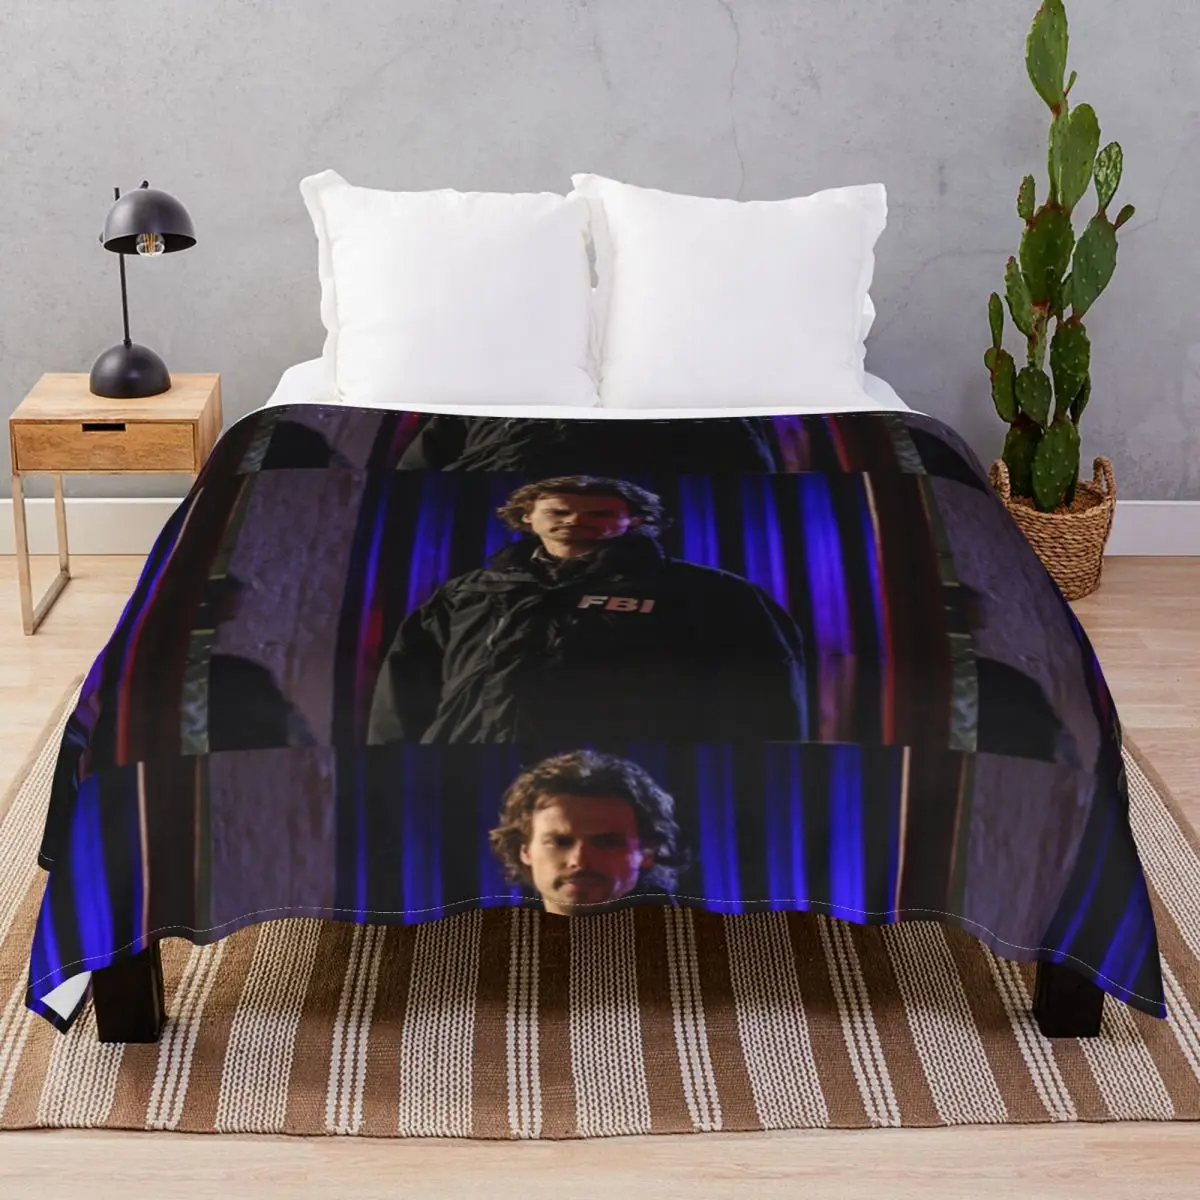 FBI Mgg Blankets Flannel Decoration Breathable Throw Blanket for Bedding Sofa Travel Office